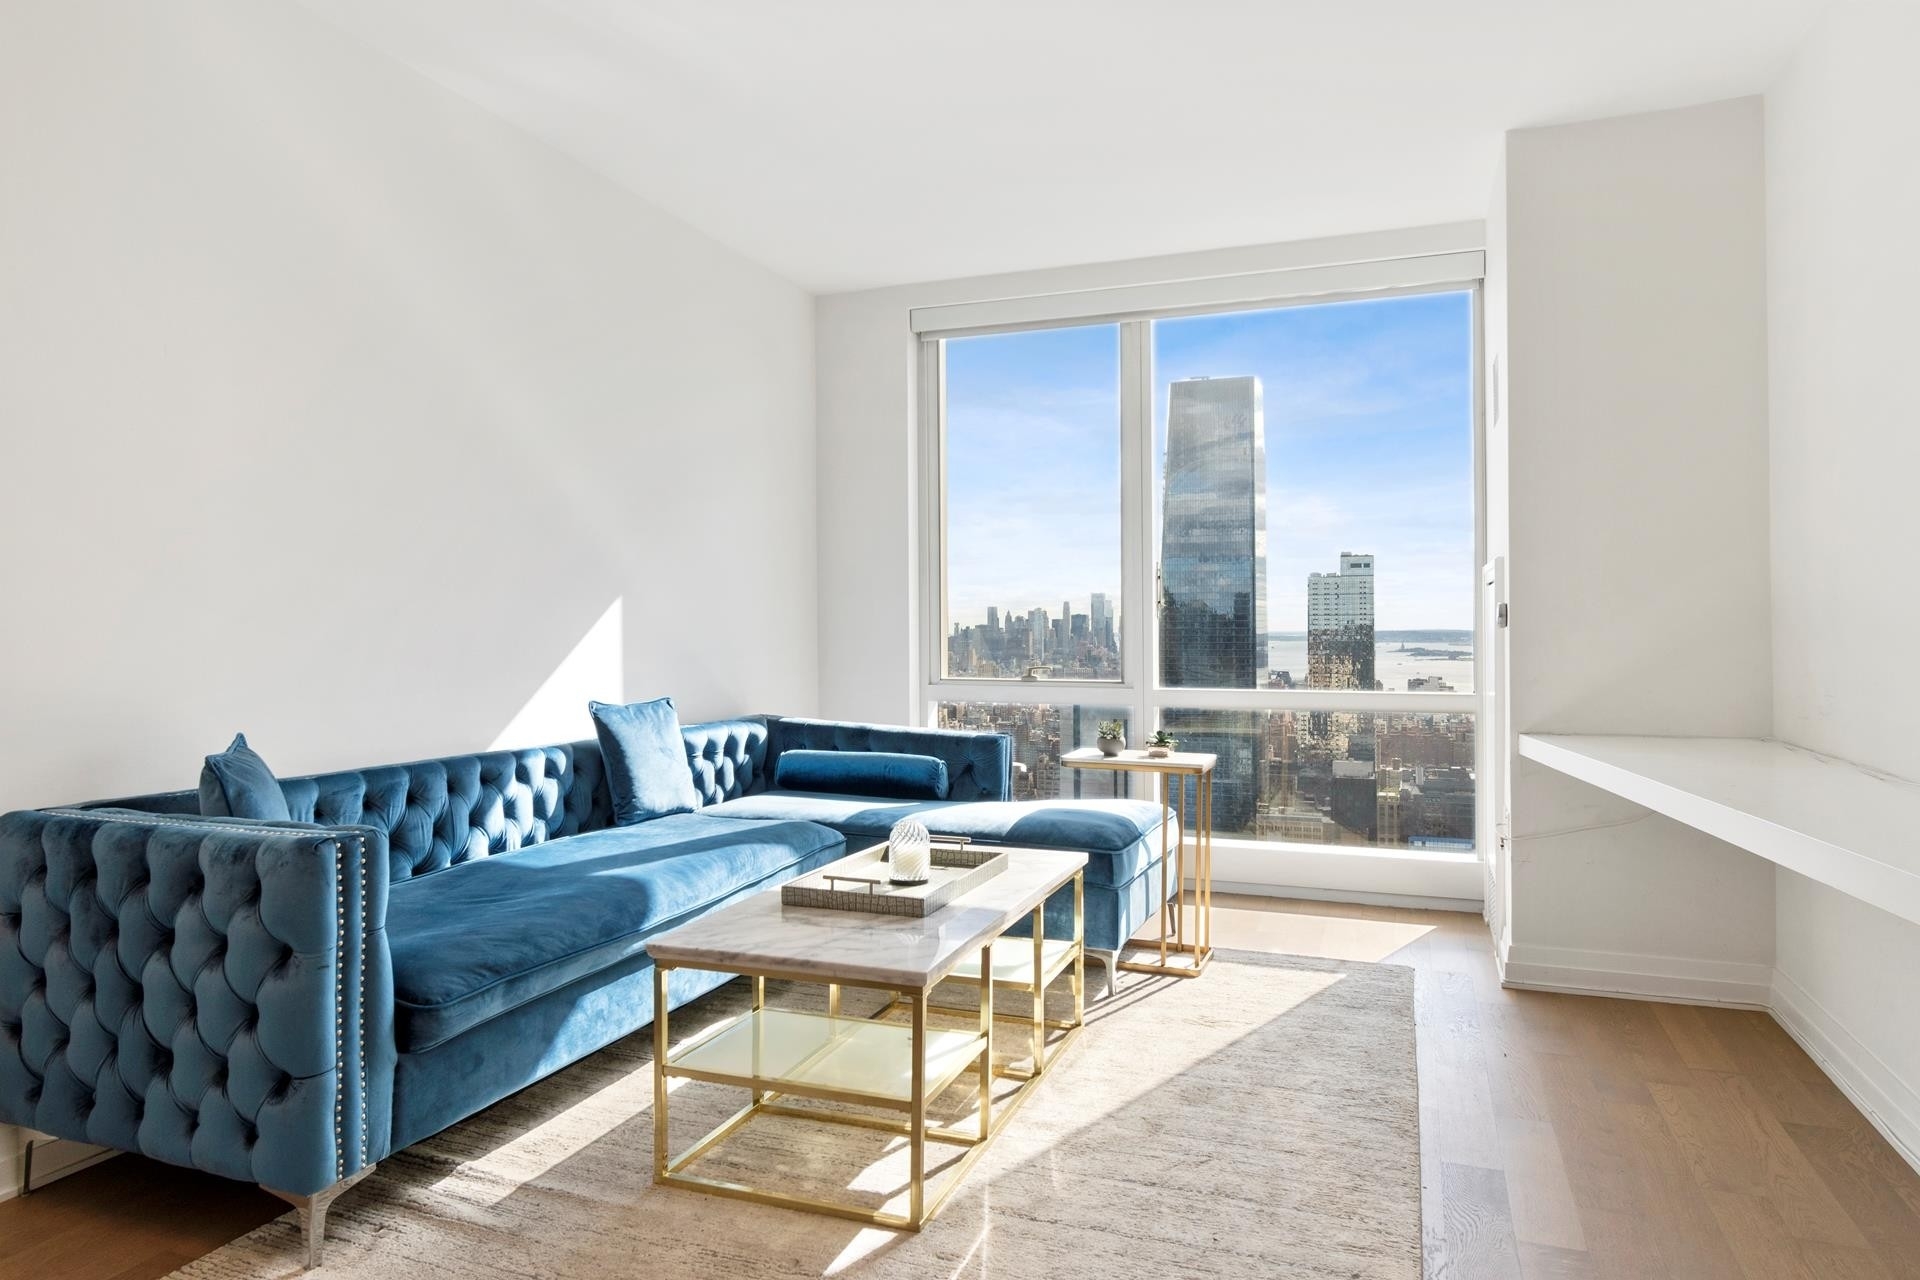 Condominium for Sale at Mima, 460 W 42ND ST, 58G Hudson Yards, New York, NY 10036